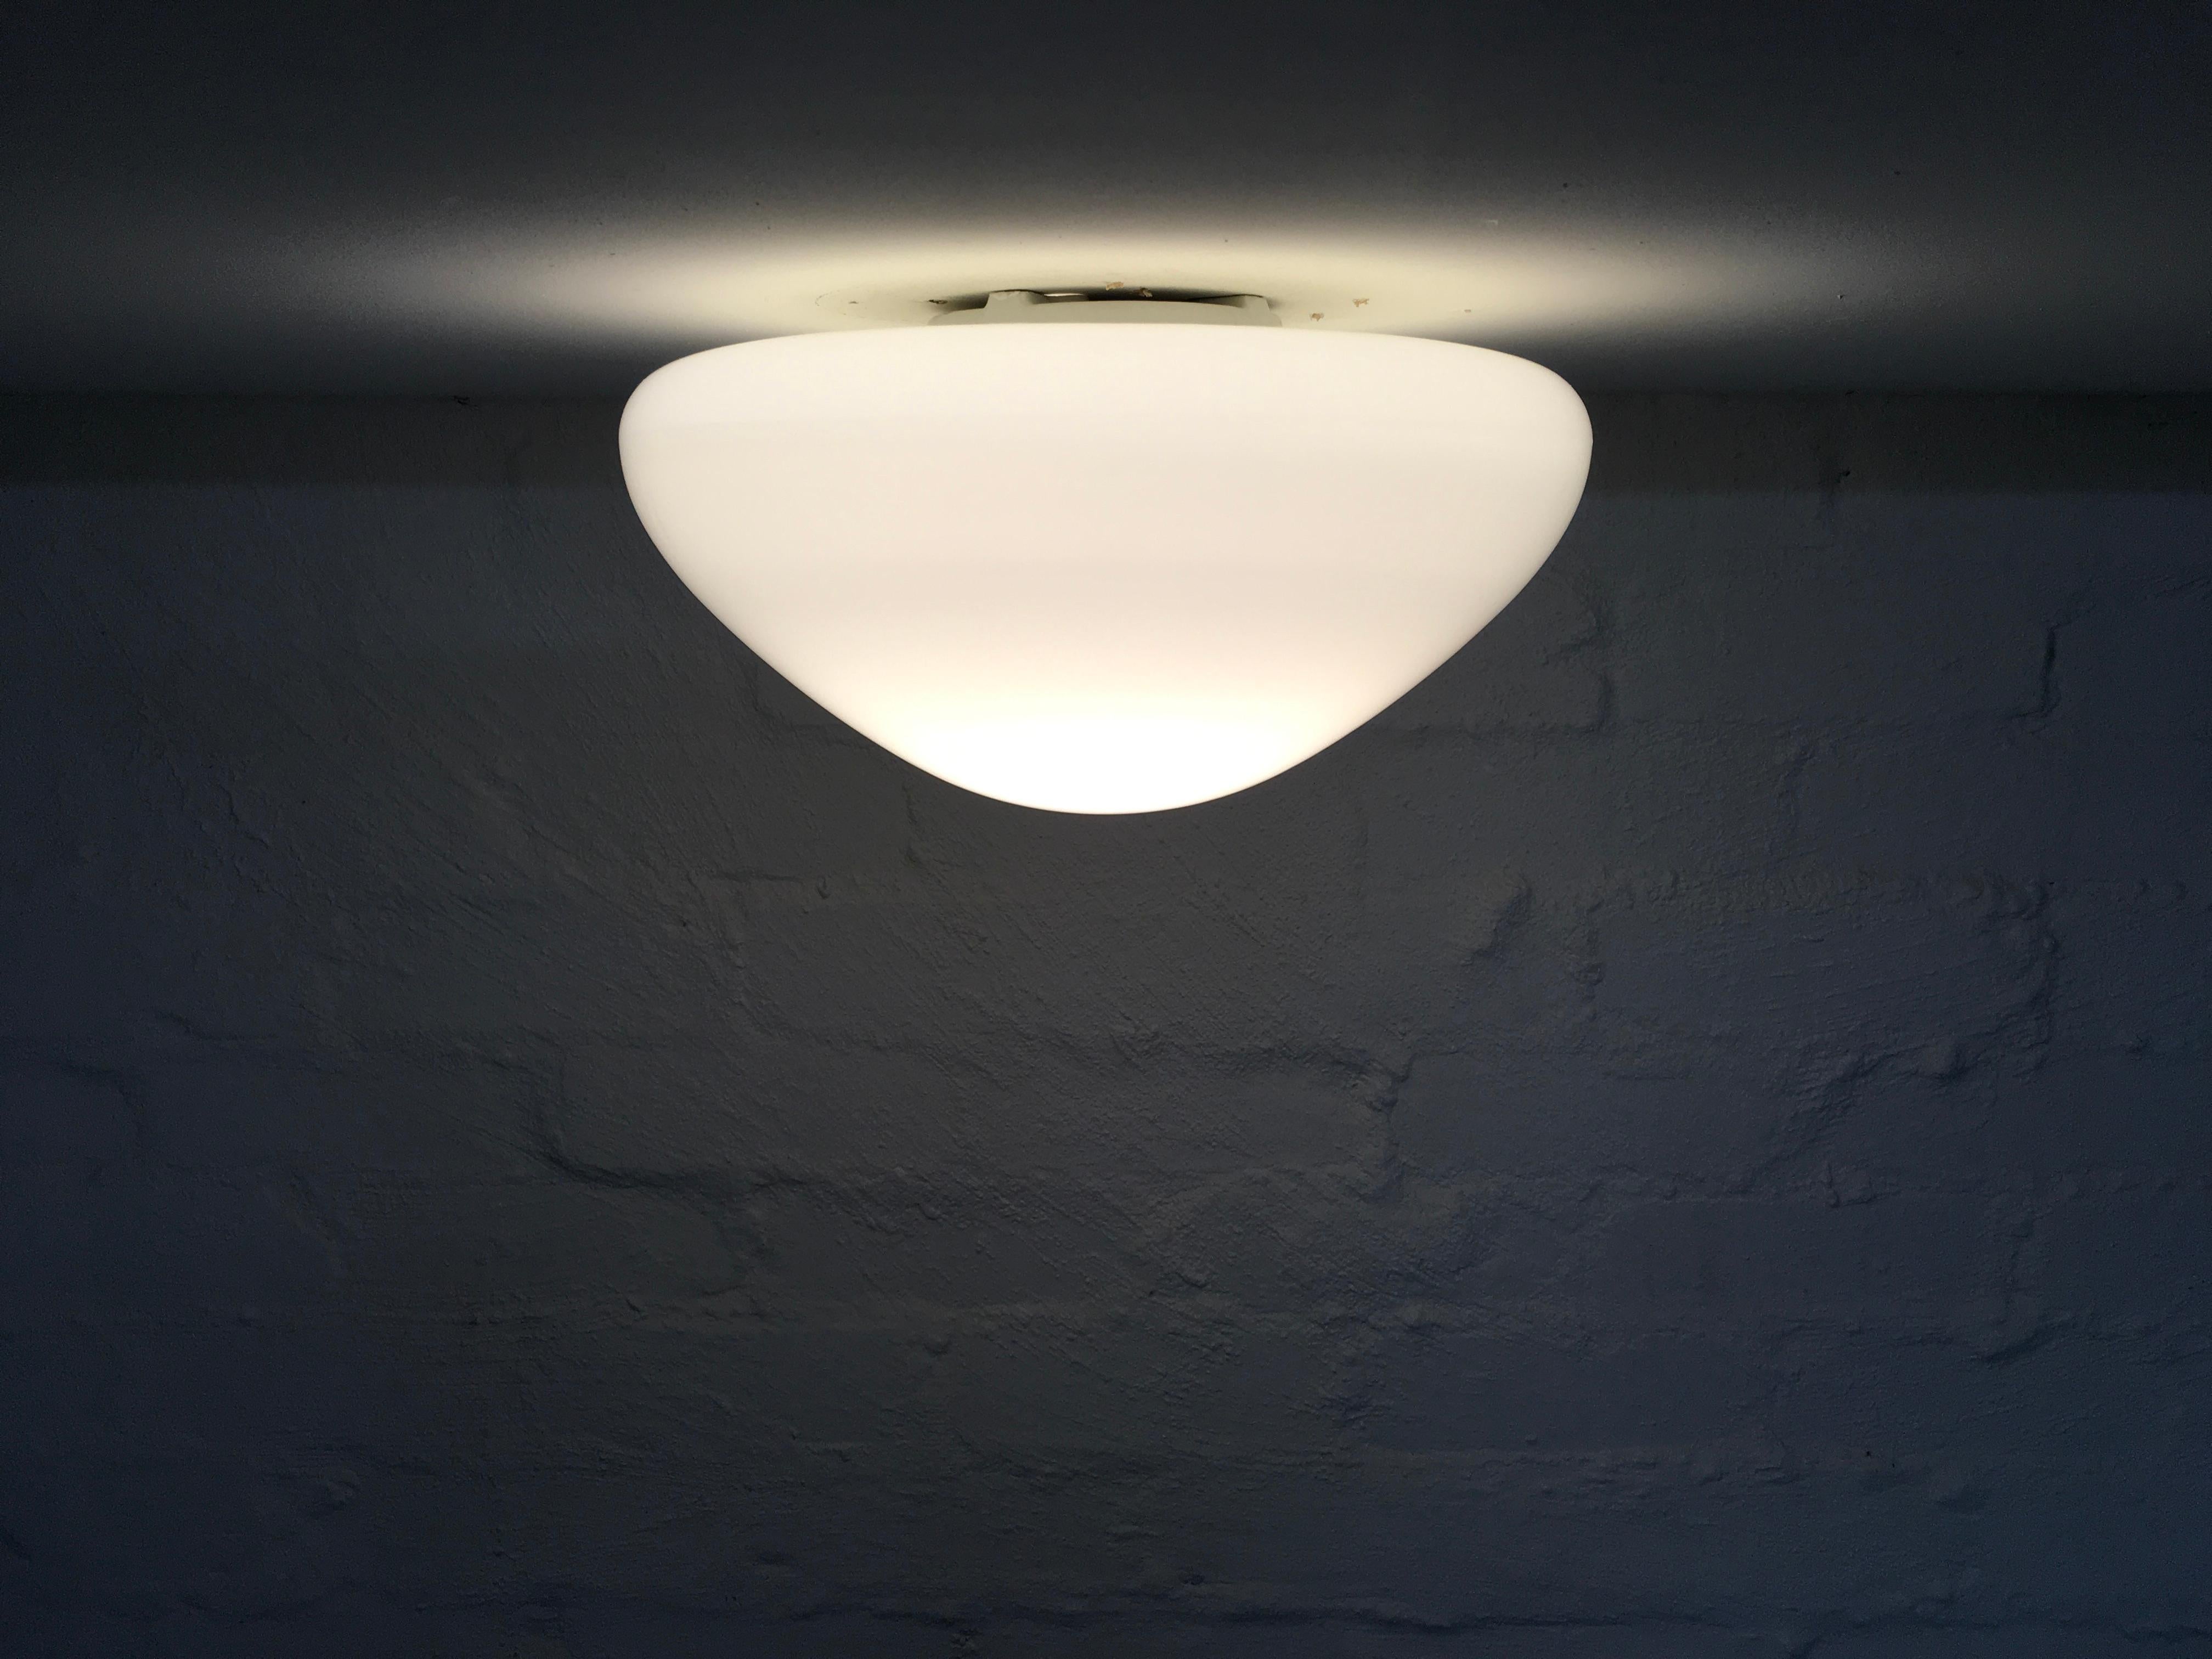 Bauhaus Wagenfeld Wall Sconce or Ceiling Light, Germany, 1955 In Good Condition For Sale In Melbourne, AU